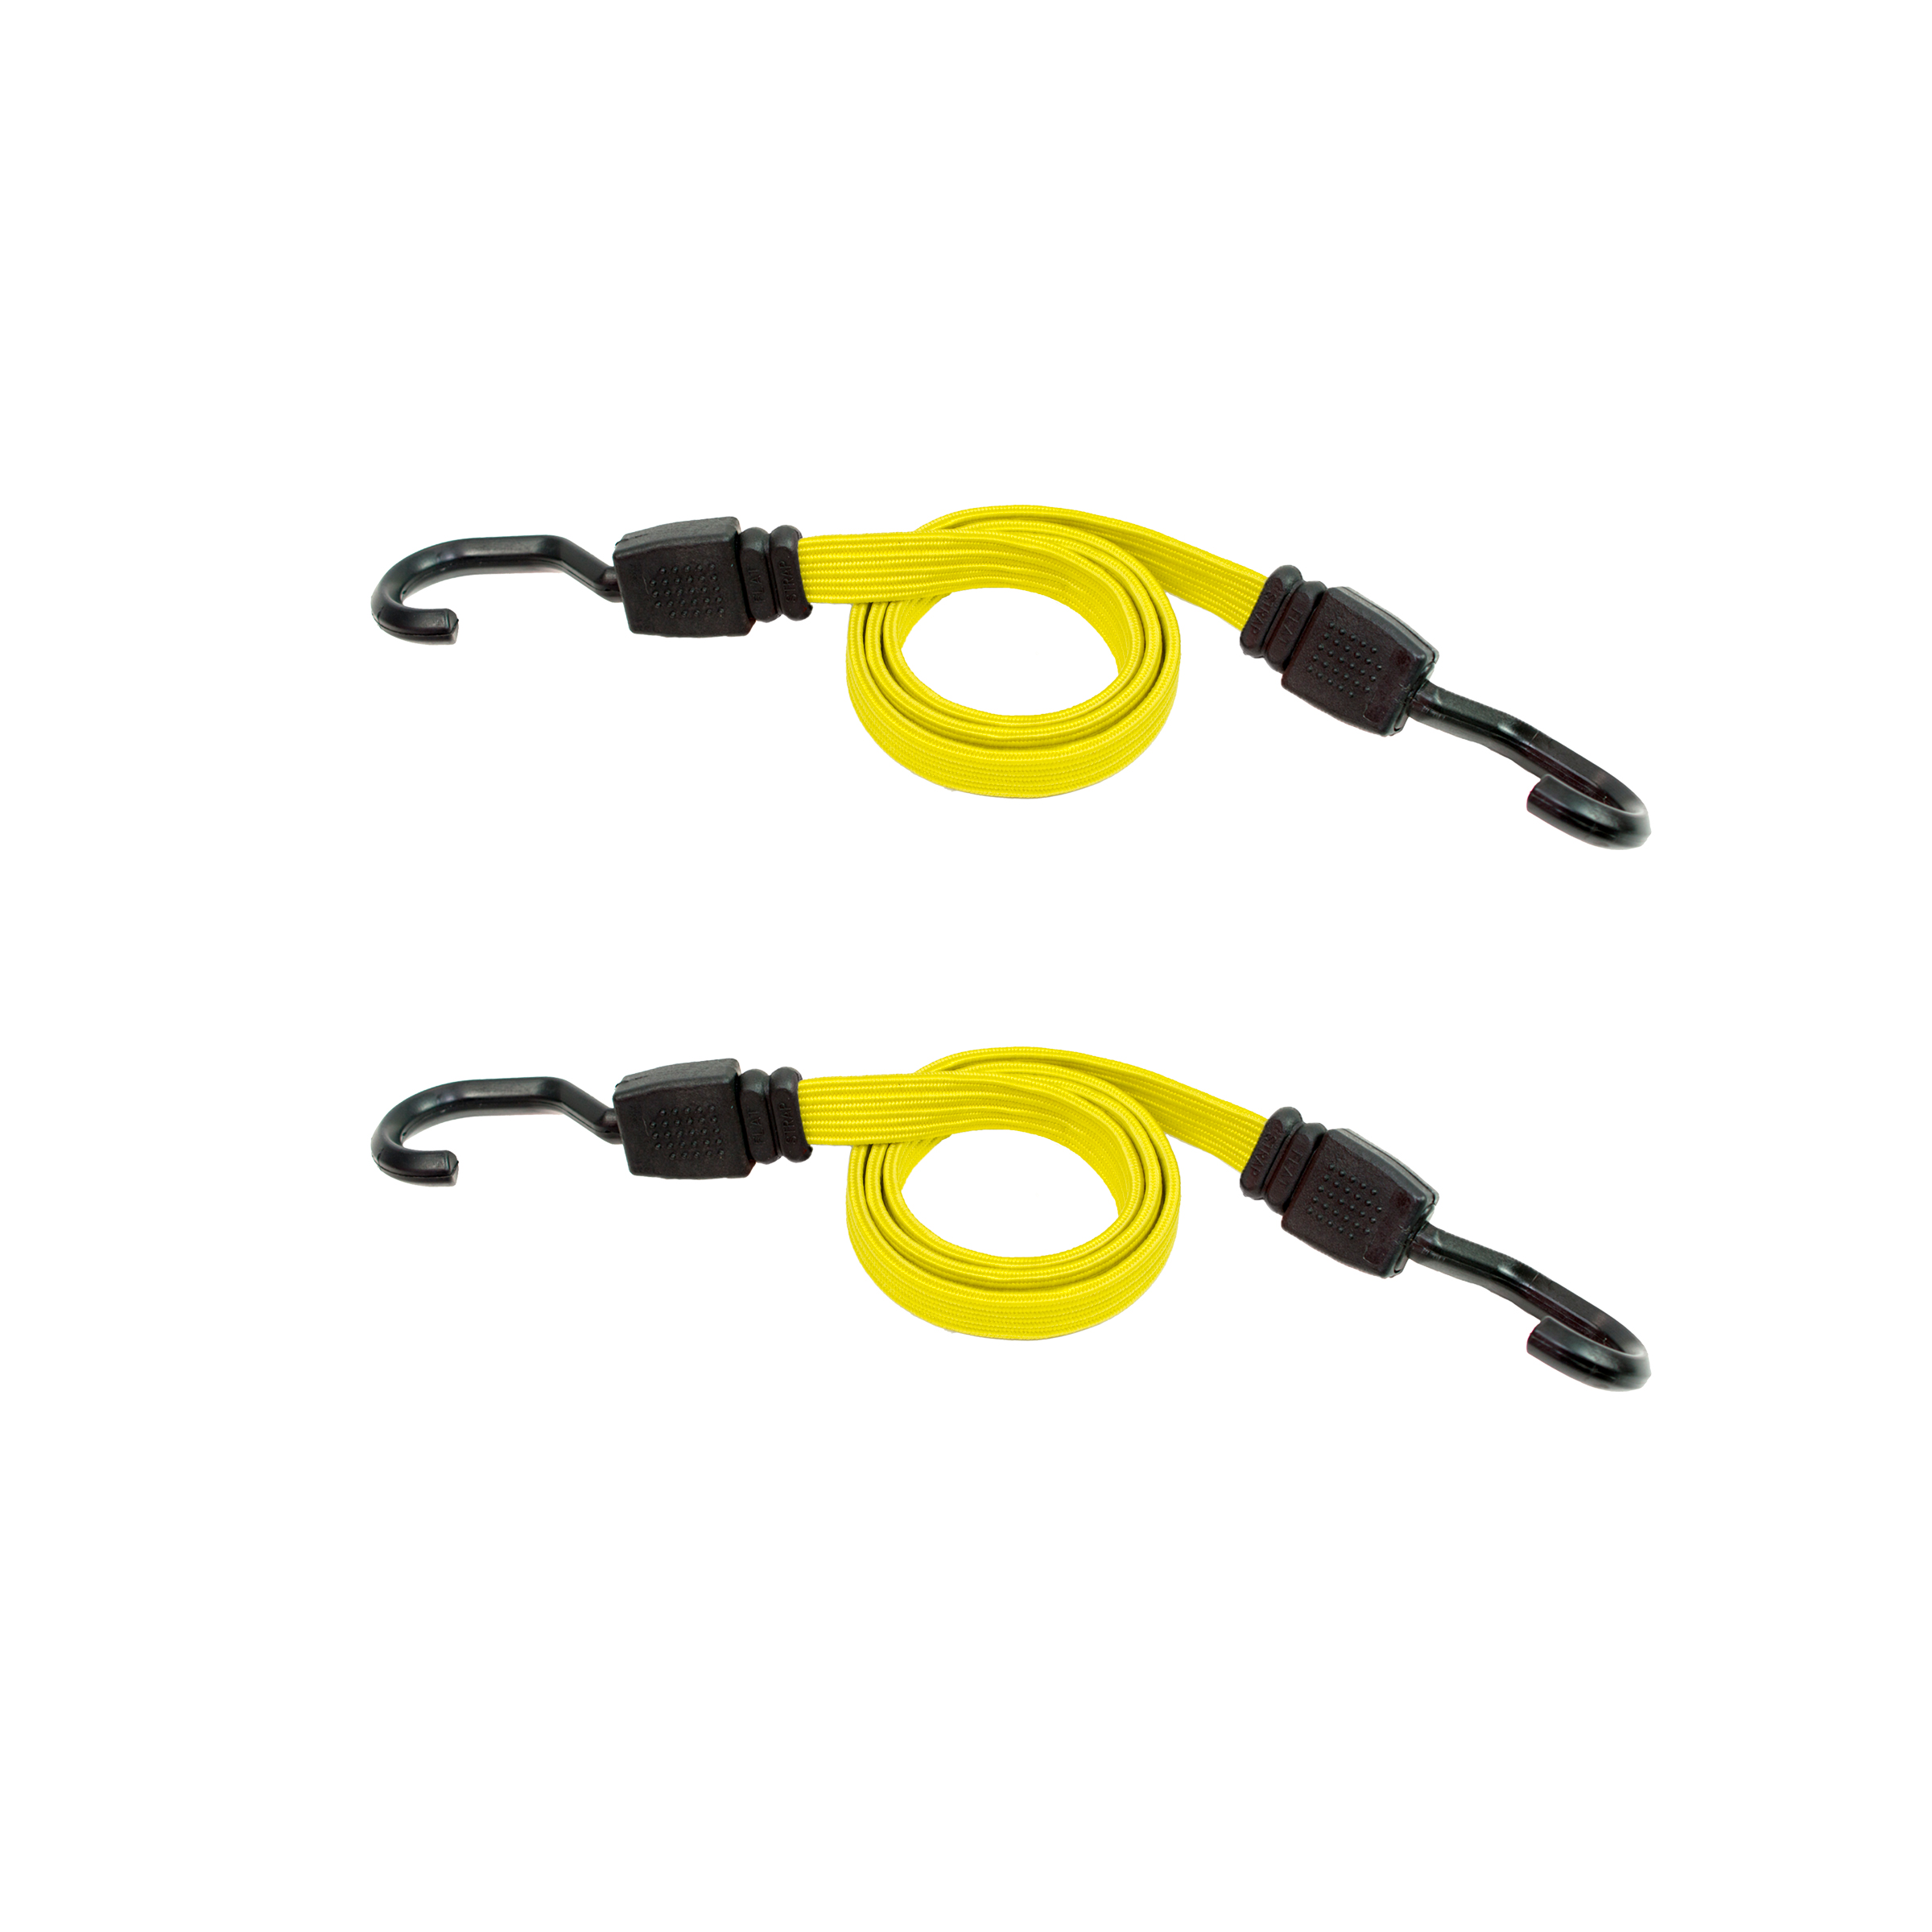 SECURE IT Flat Strap Bungee - 2 Pack 36"